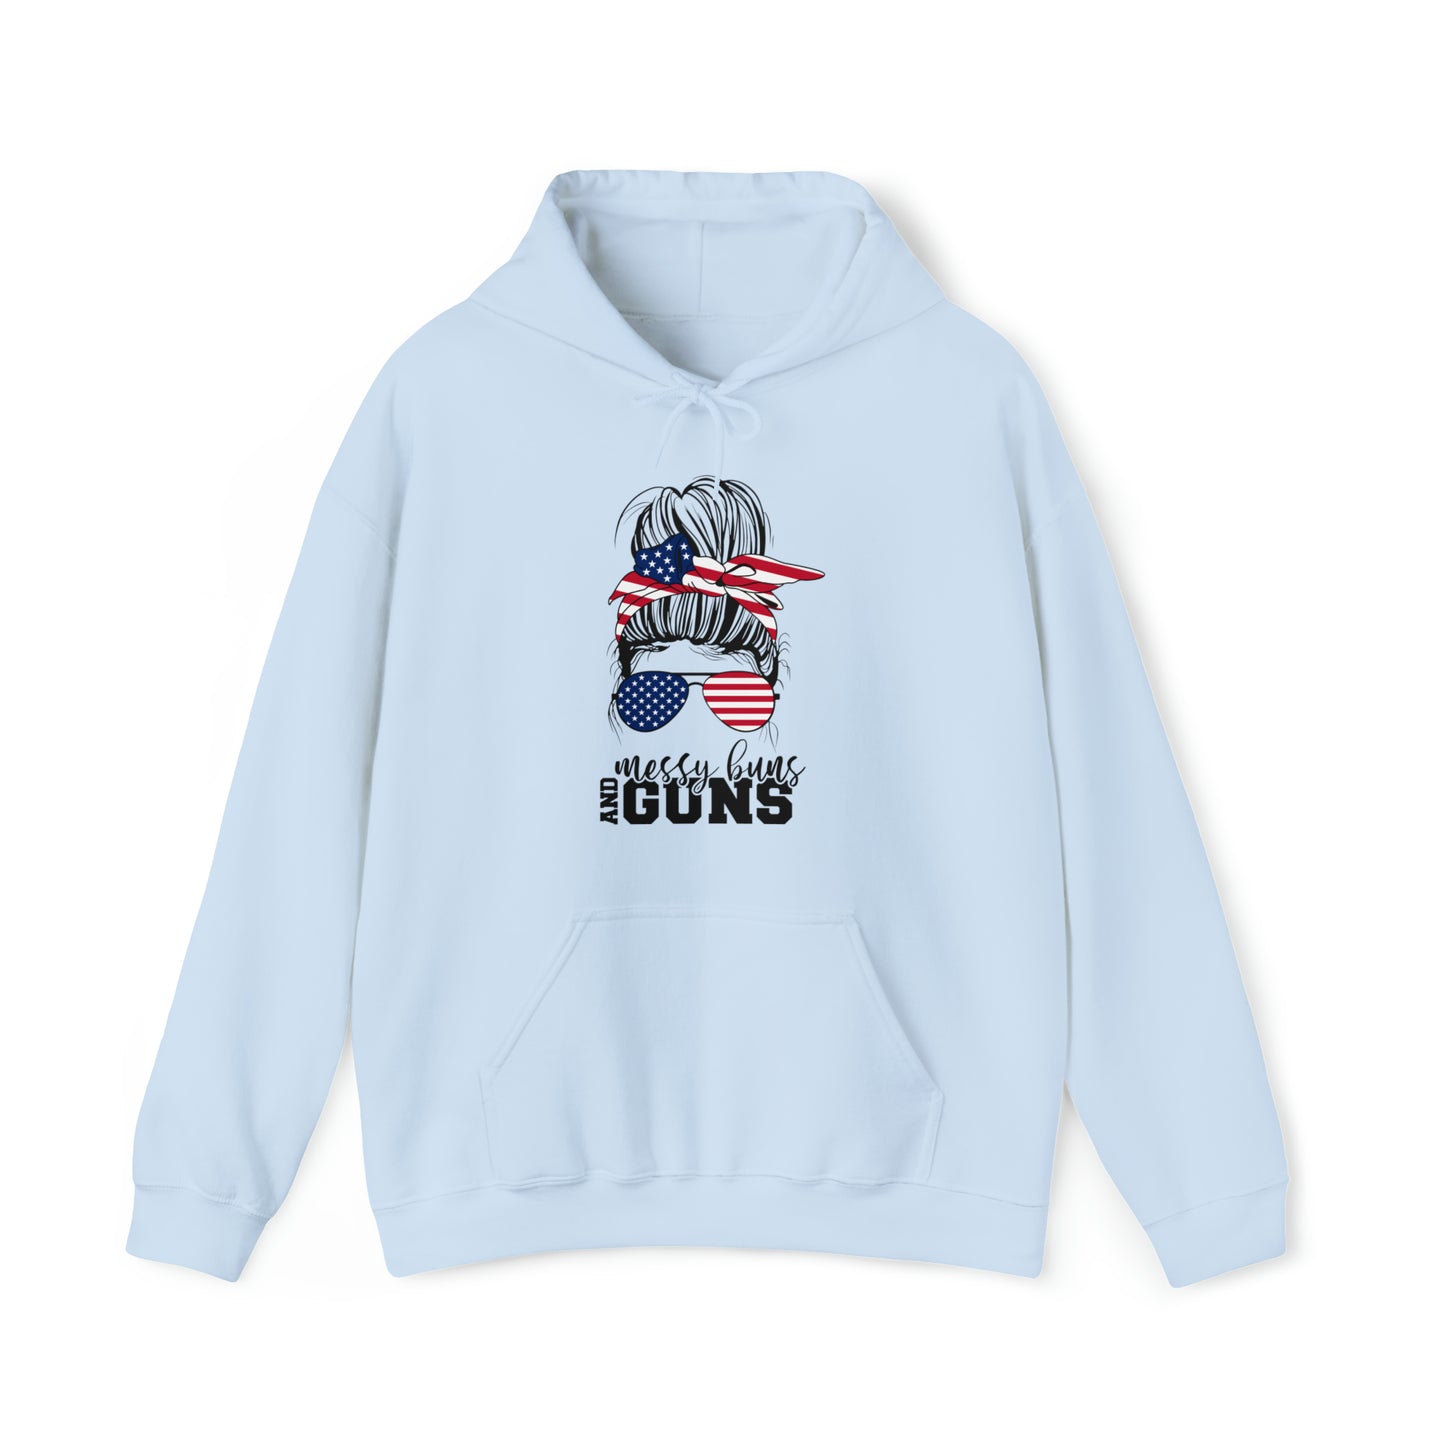 MESSY BUNS AND GUNS - UNISEX HOODIE